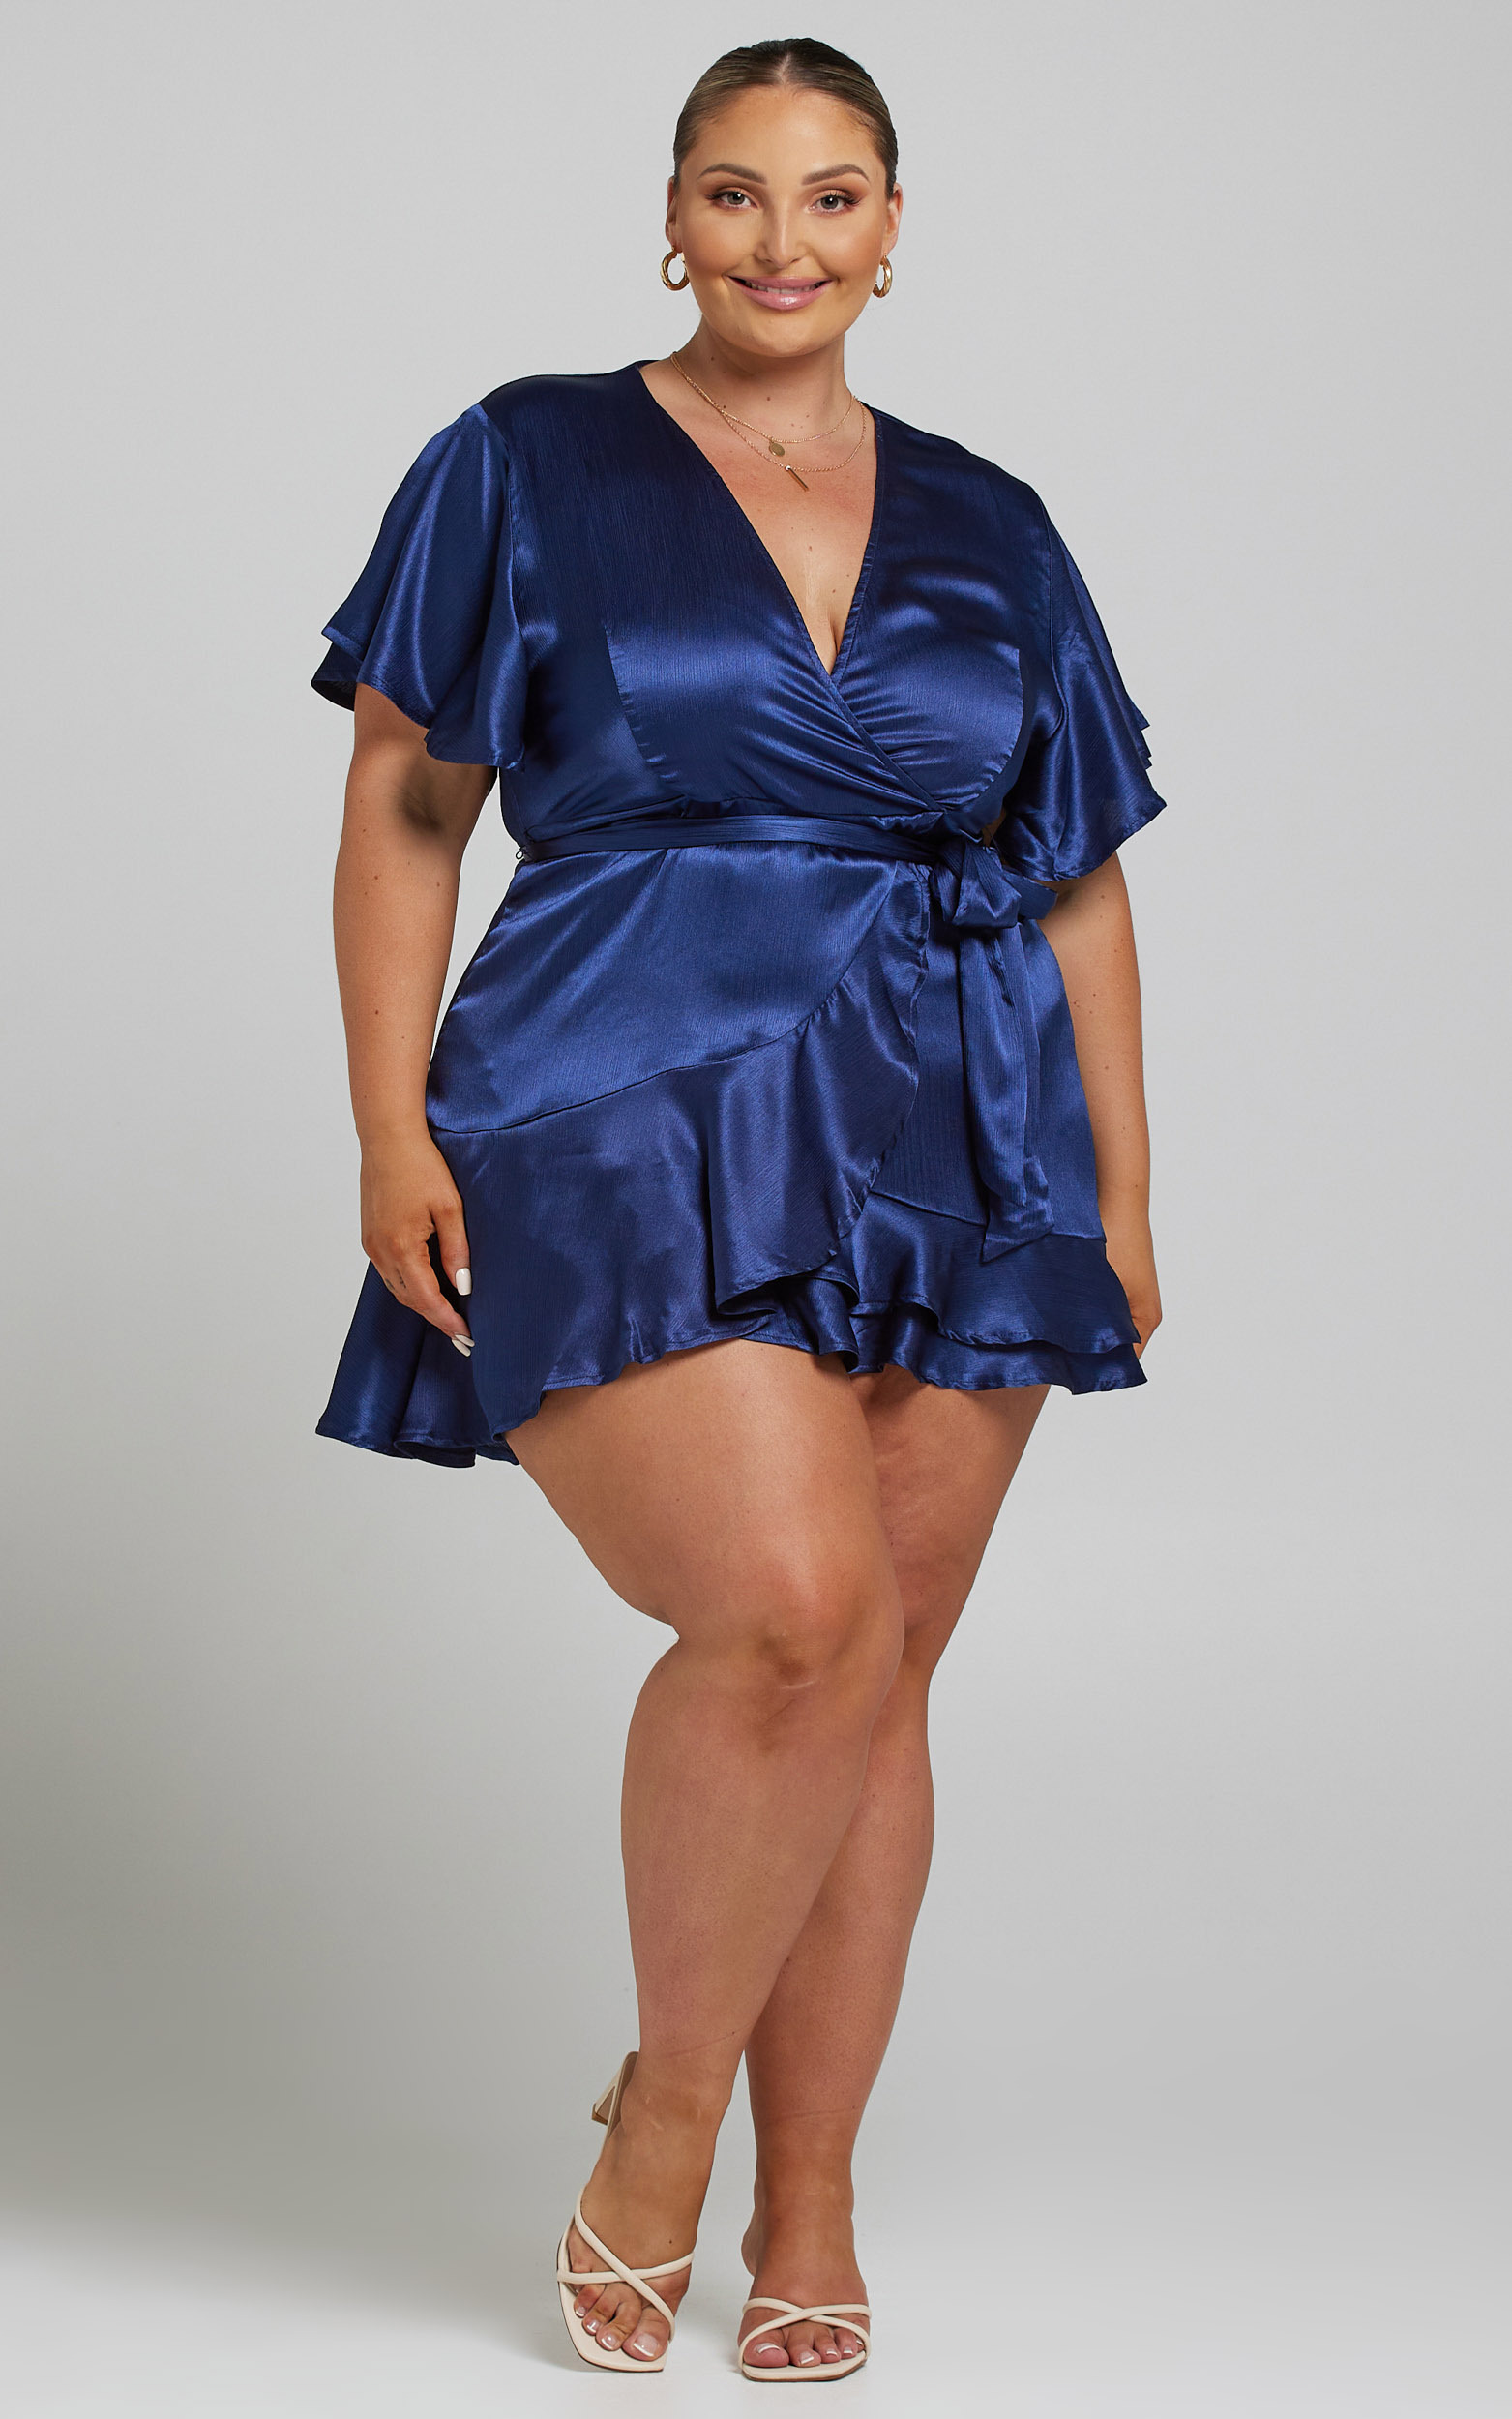 All I Want To Be Ruffle Mini Dress in Navy Satin - 20, NVY3, hi-res image number null